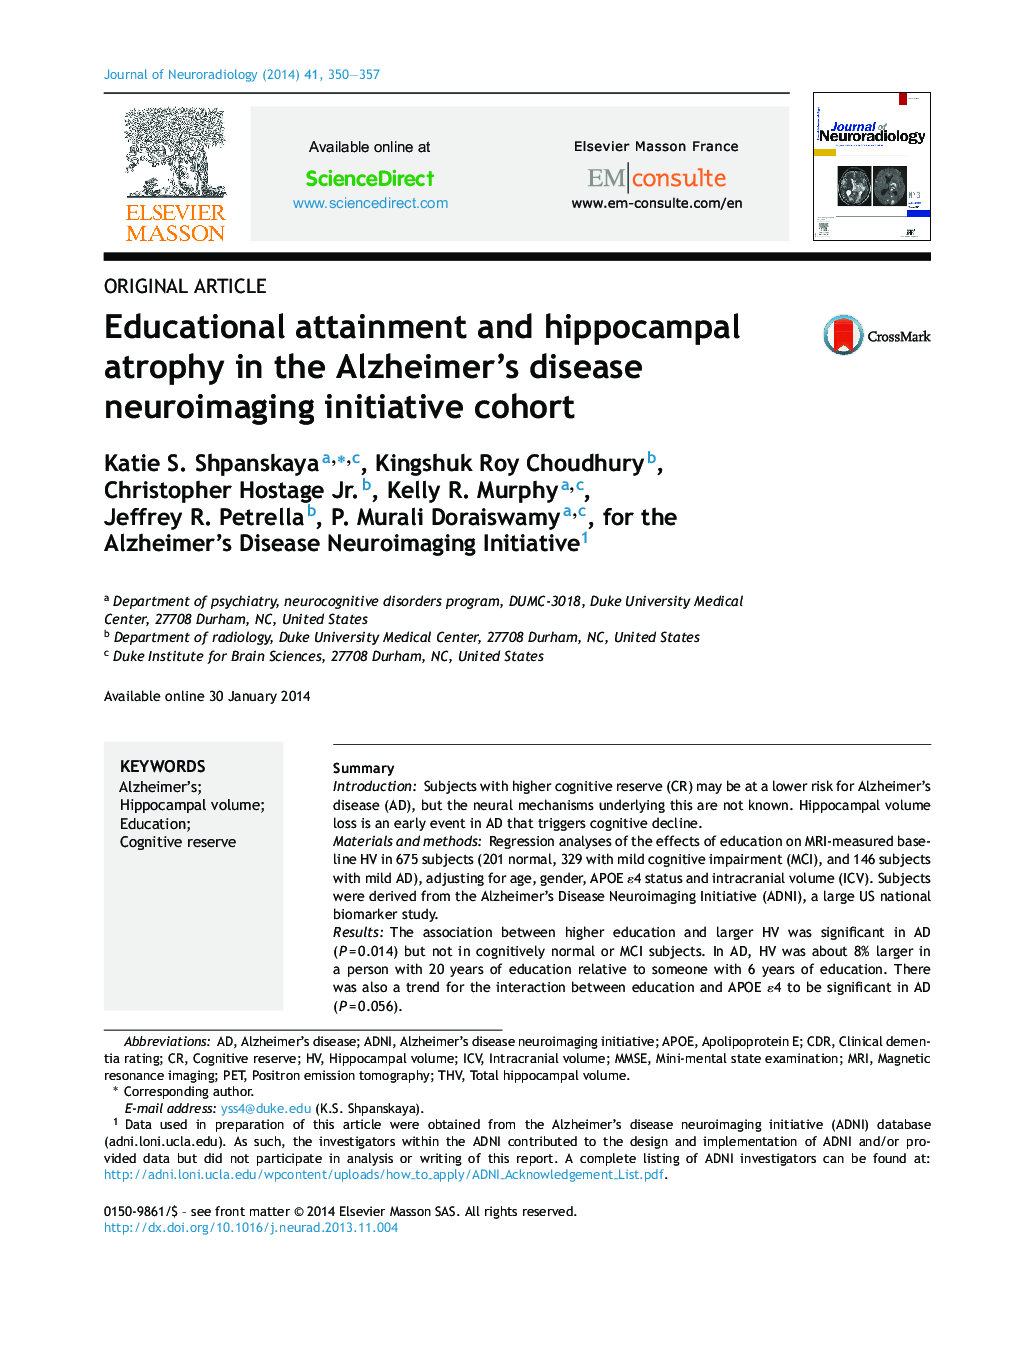 Educational attainment and hippocampal atrophy in the Alzheimer's disease neuroimaging initiative cohort